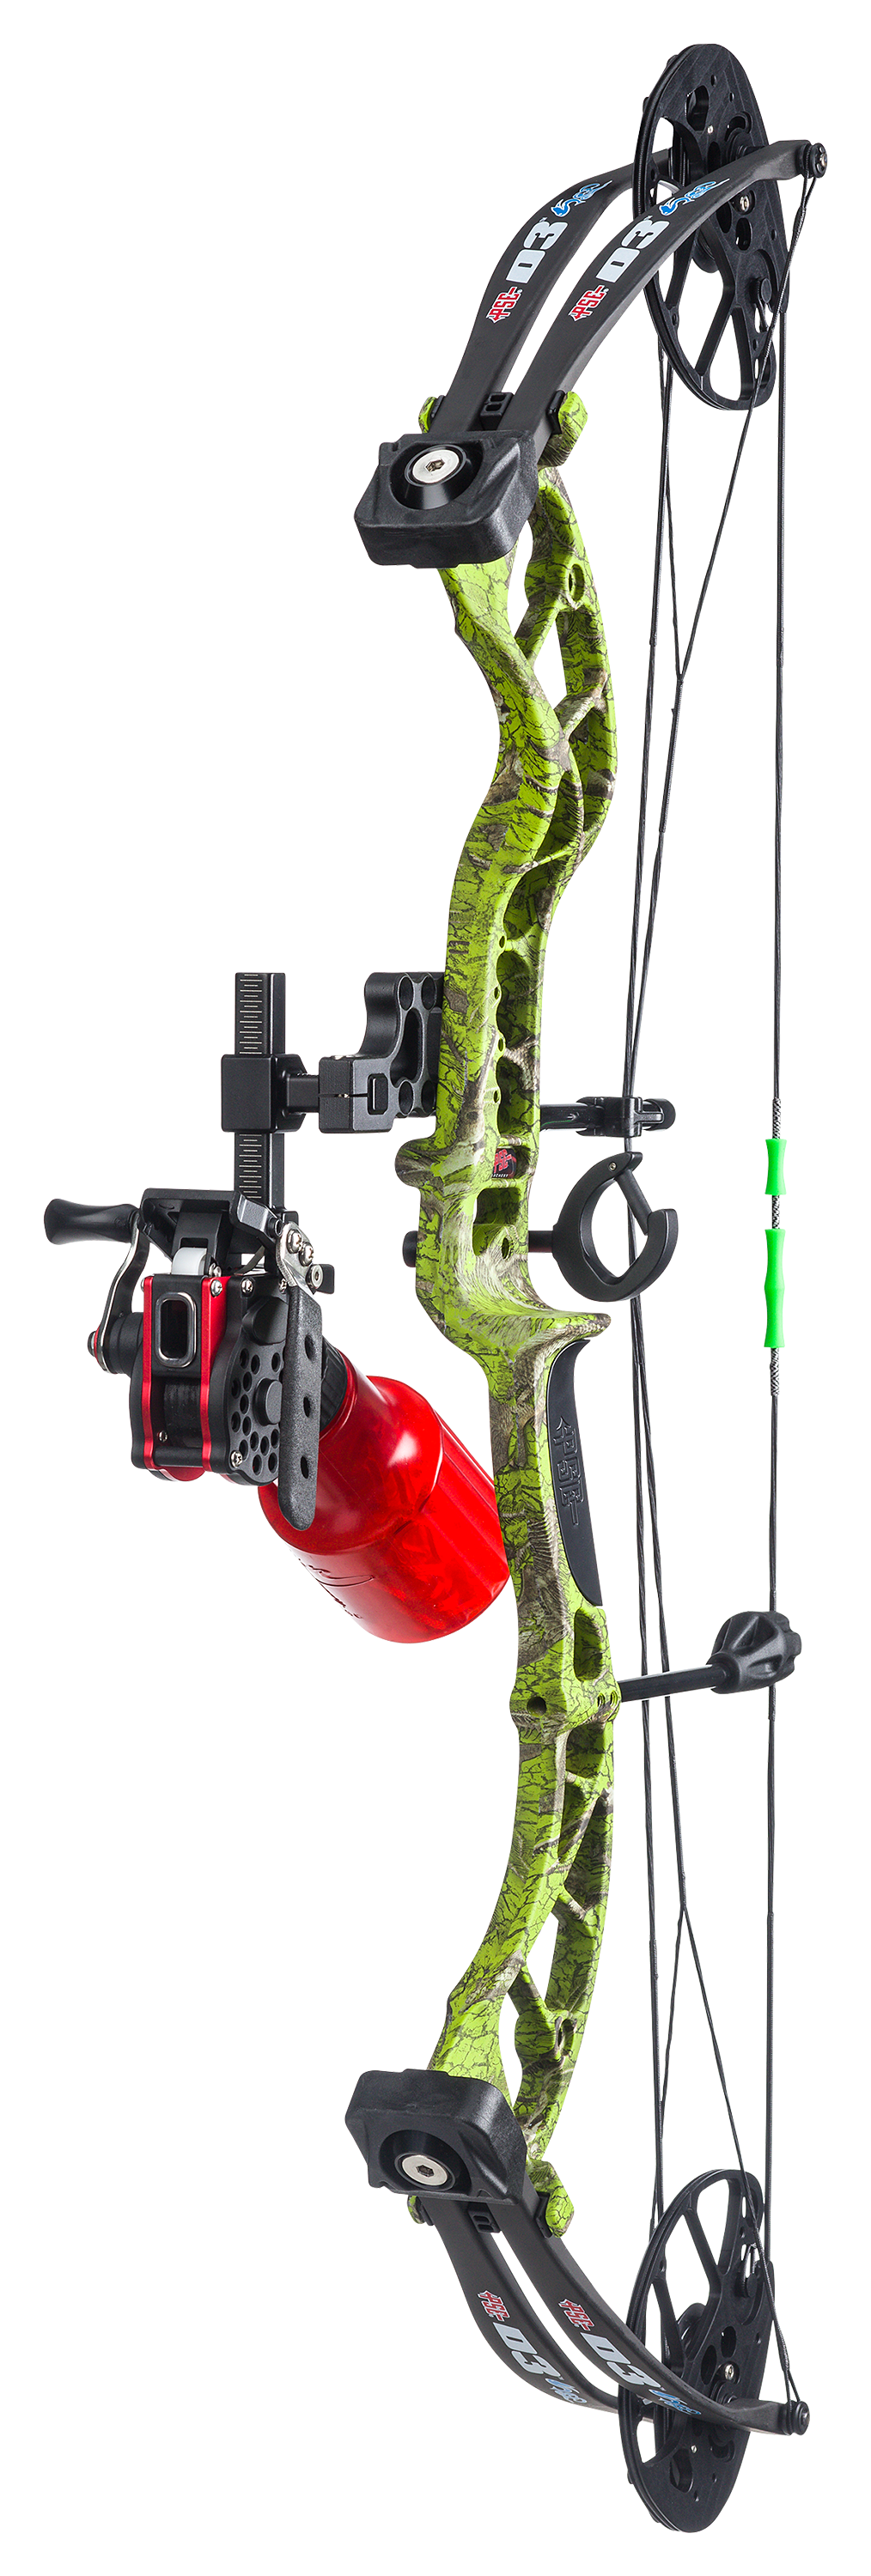 PSE D3 Bowfishing Bow Green, Size: One Size